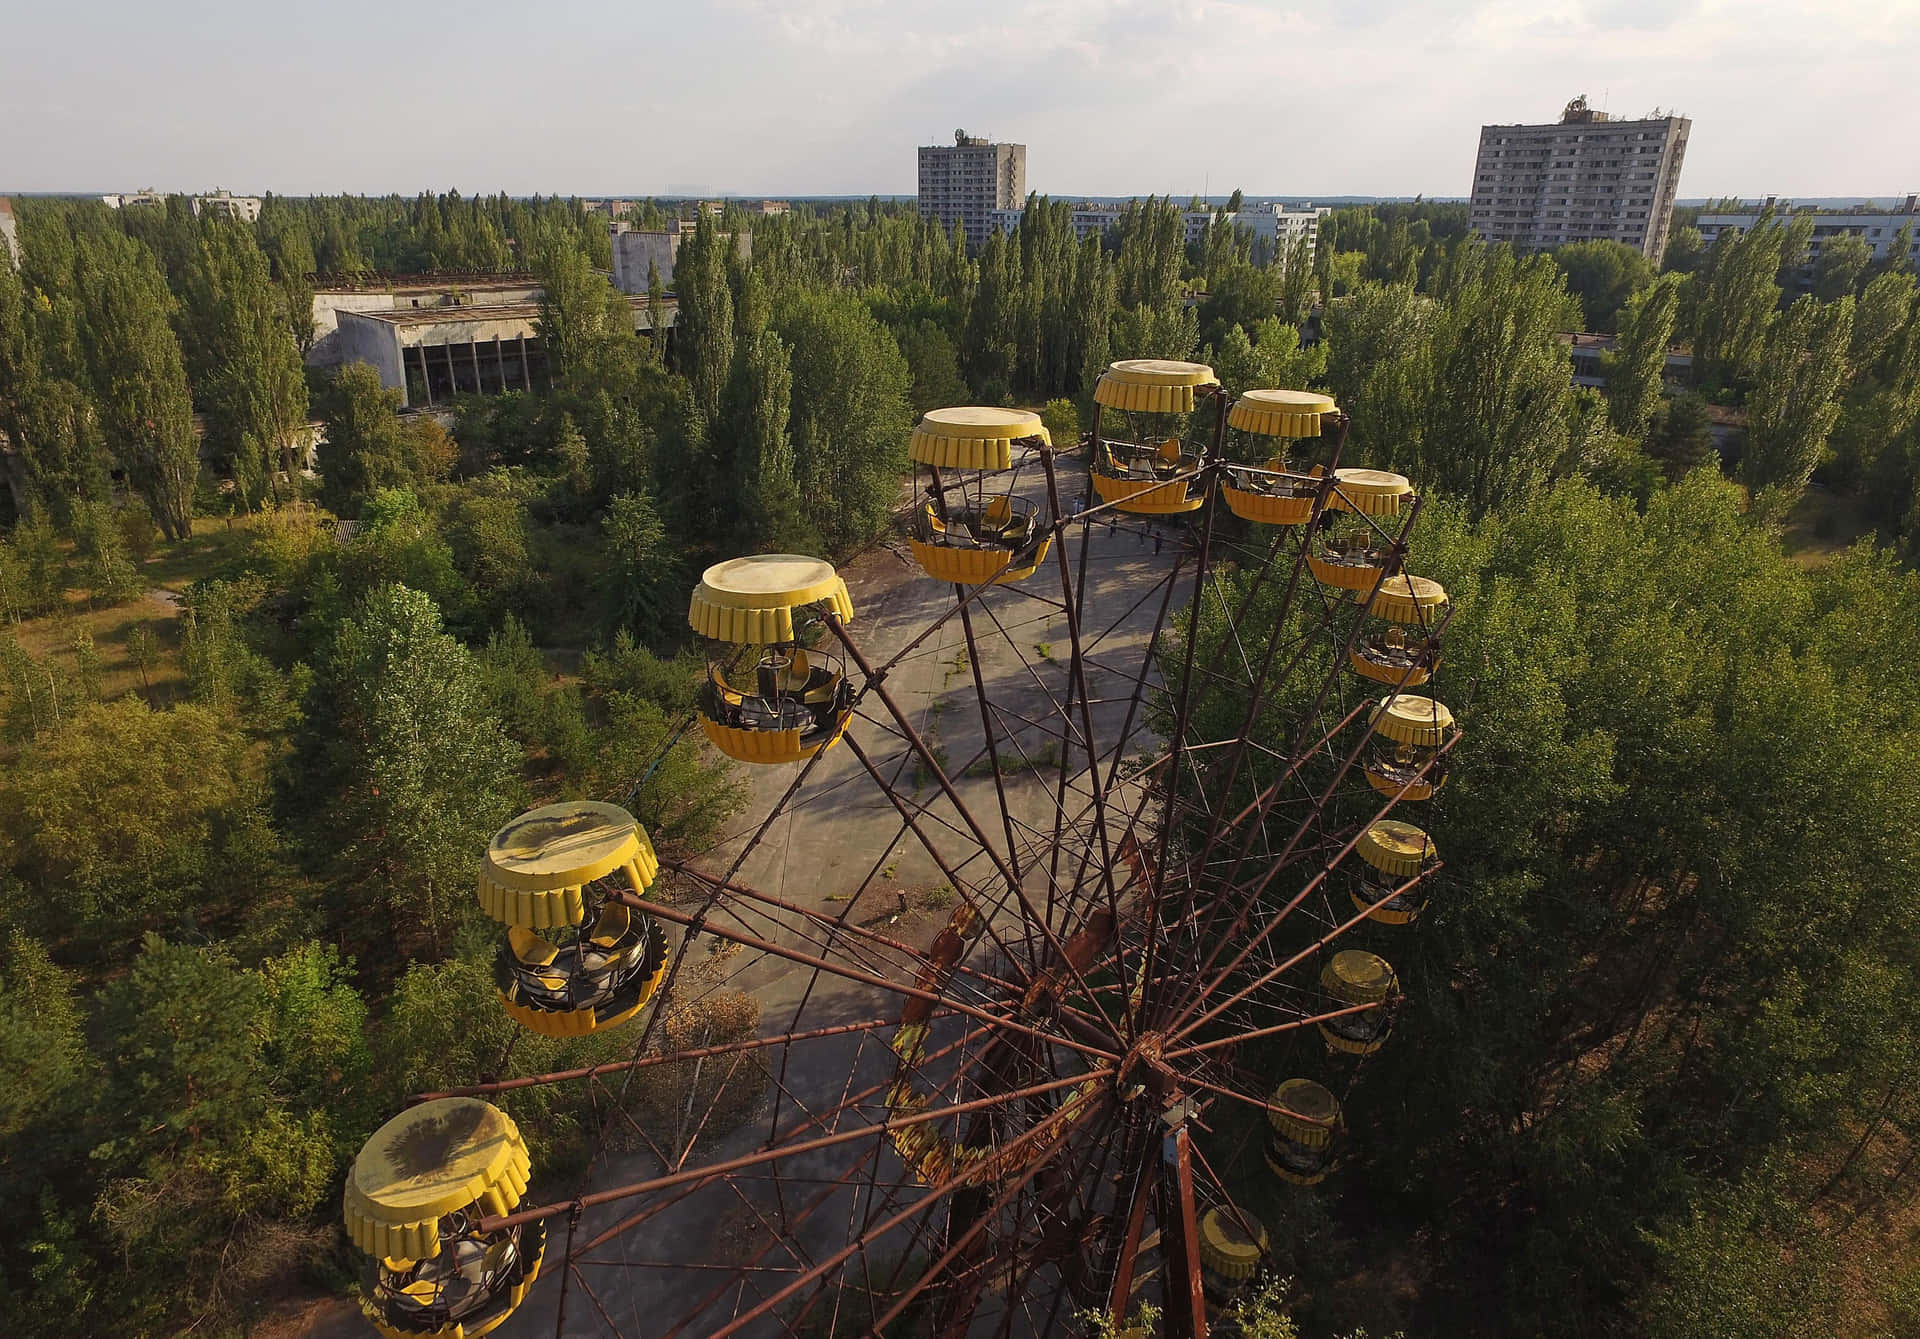 A Ferris Wheel In The Middle Of A Forest